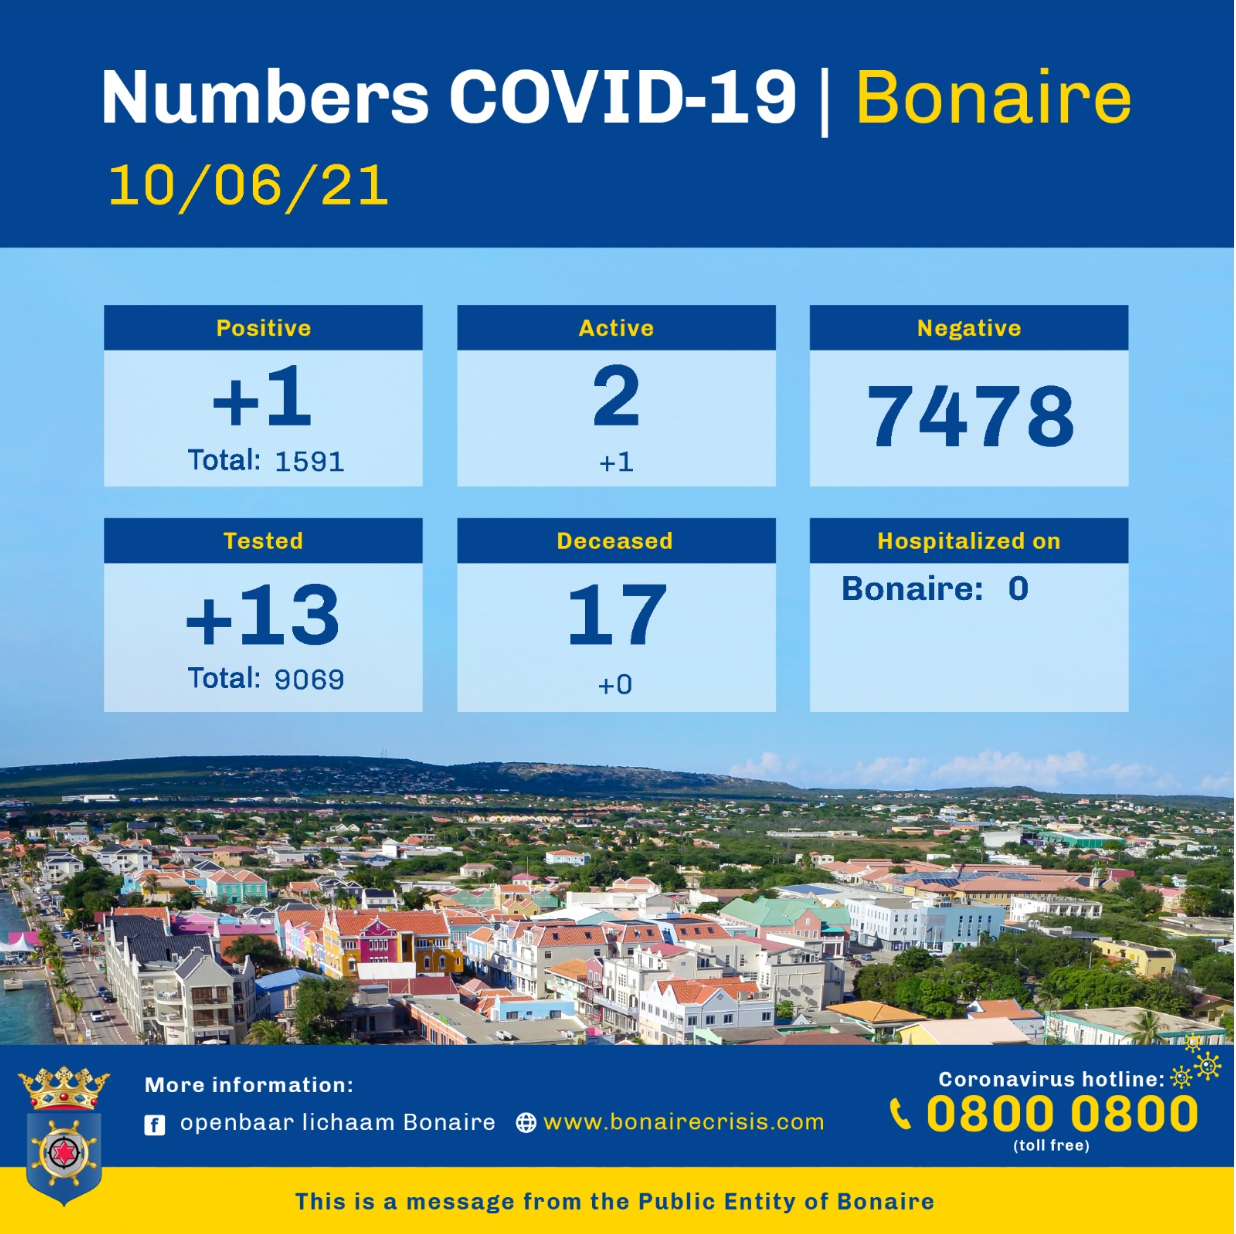 One New Covid-infection on Bonaire